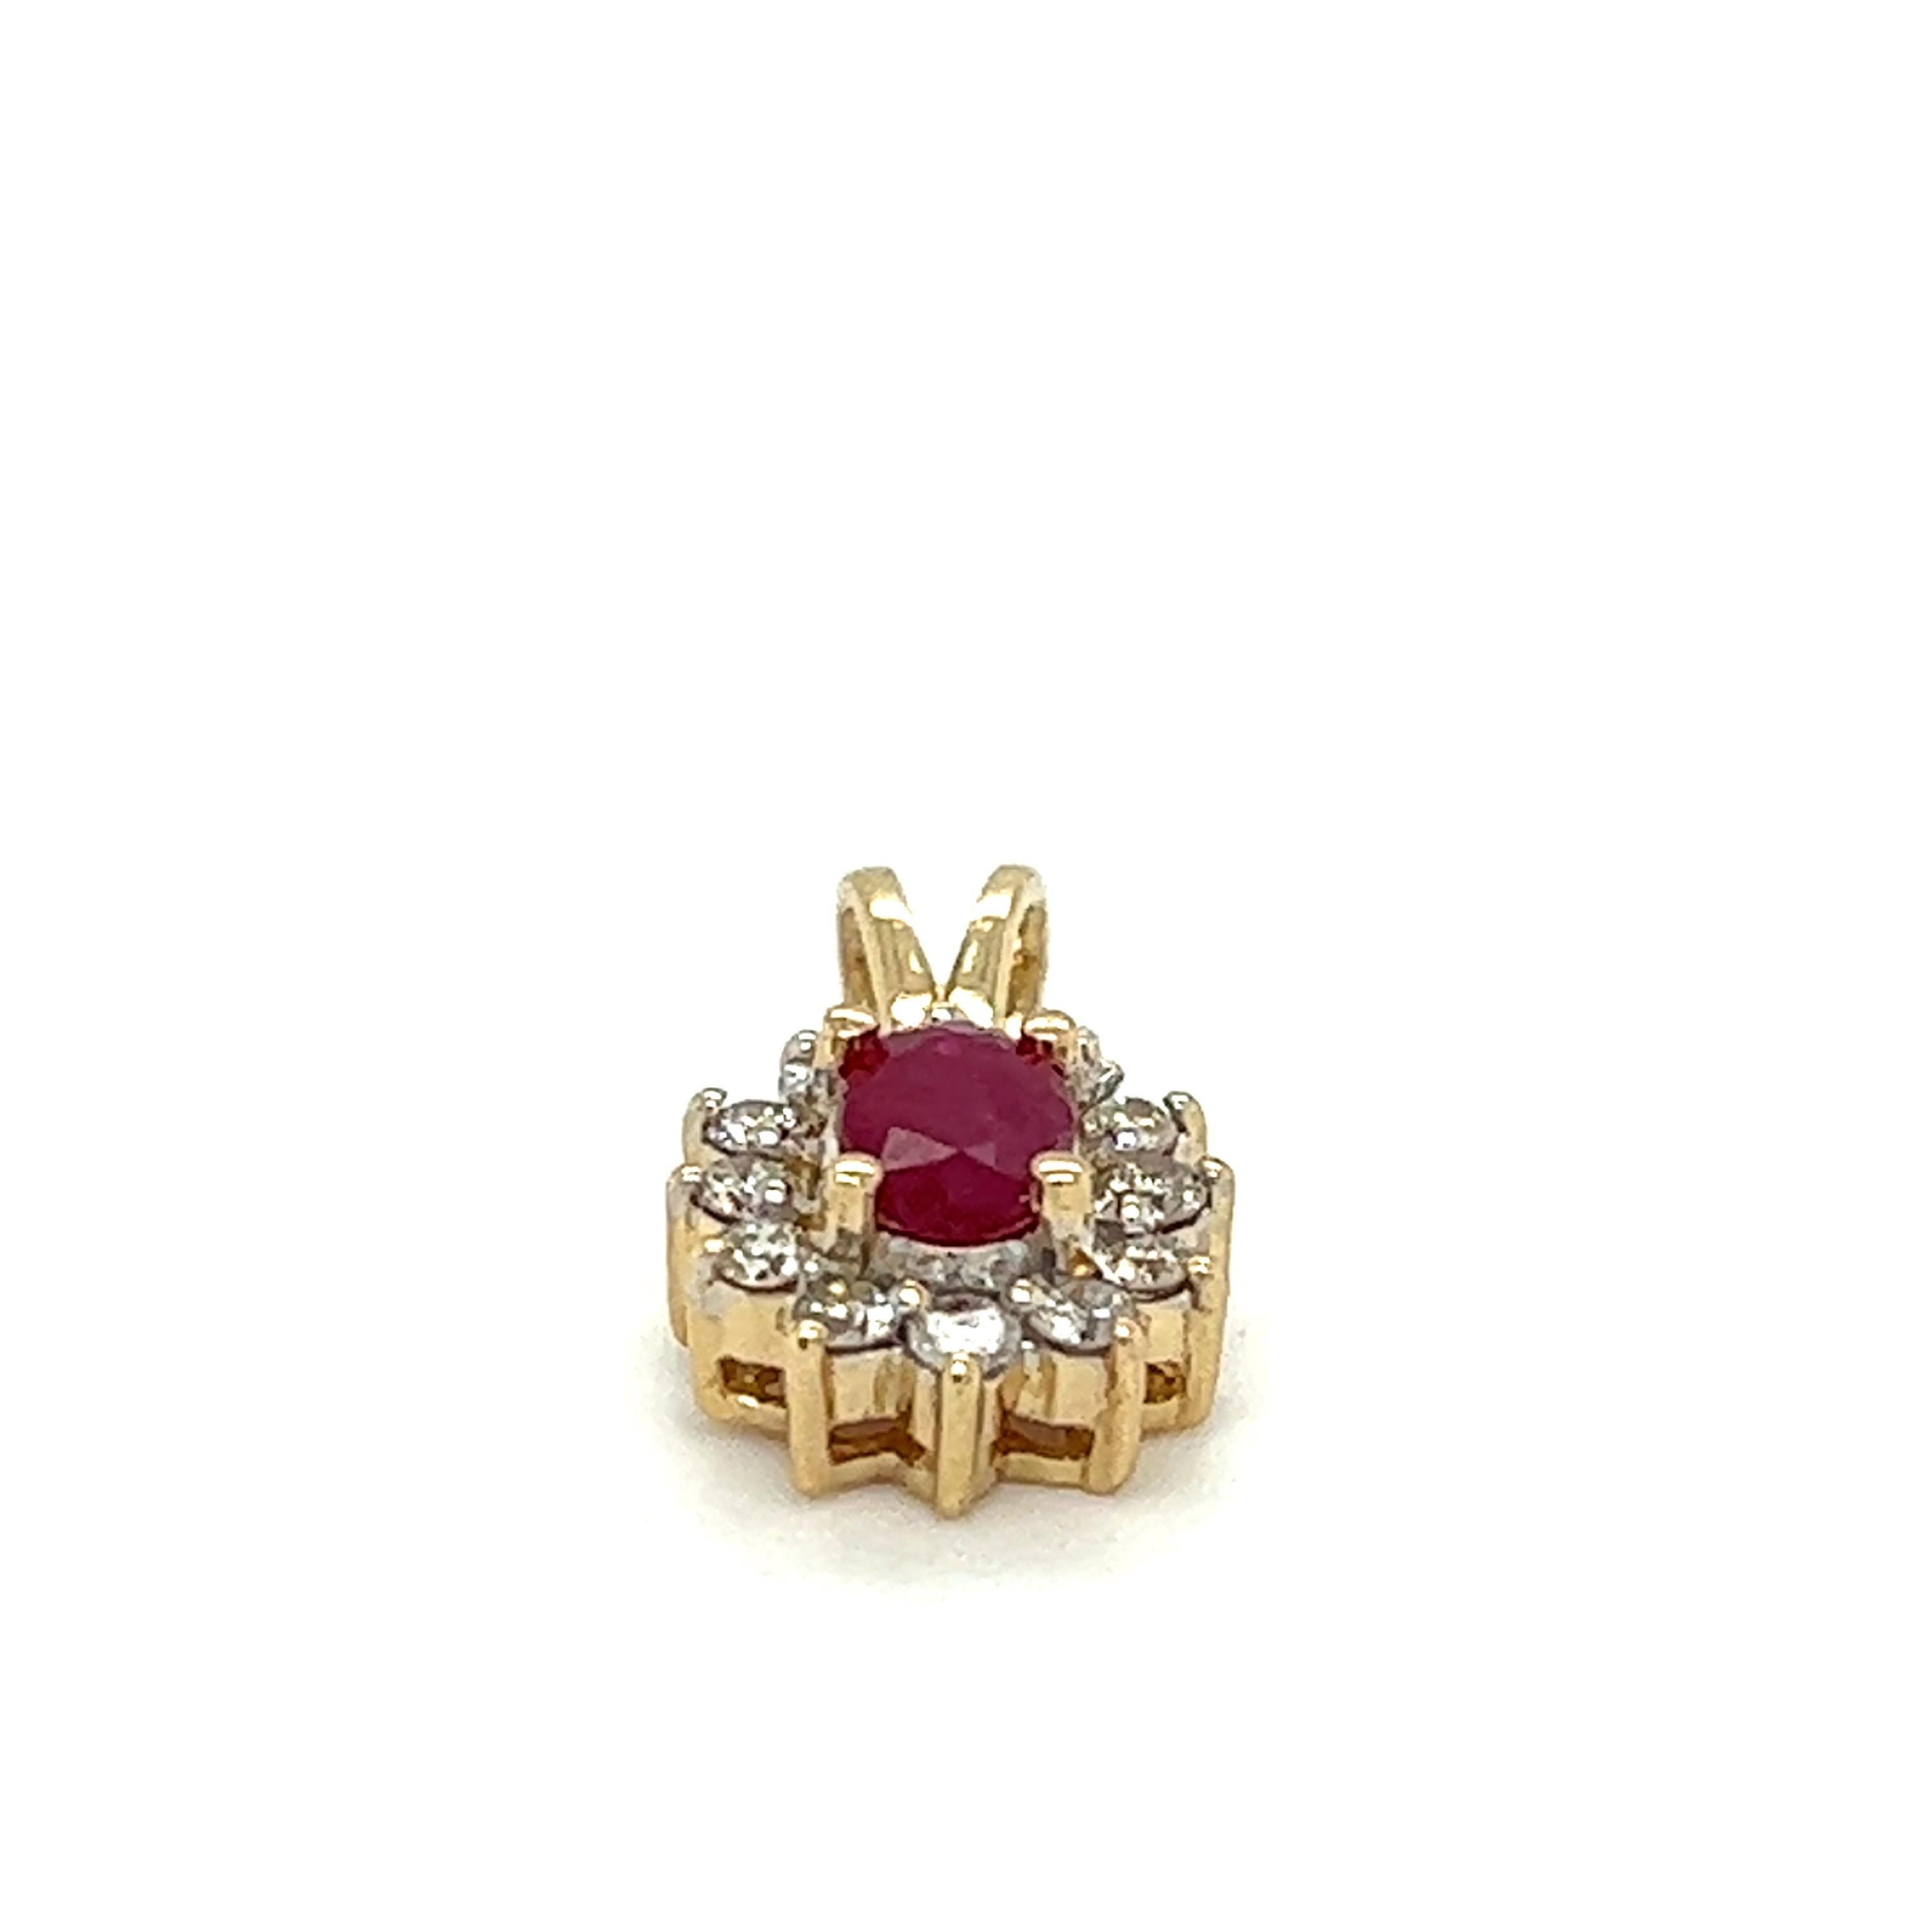 One 14 karat yellow gold cluster pendant set with one (1) 6x4mm oval natural ruby, surrounded by twelve (12) round brilliant cut diamonds, approximately .18 carat total weight with matching K/L color and SI1 clarity. The pendant measures 17.00mm